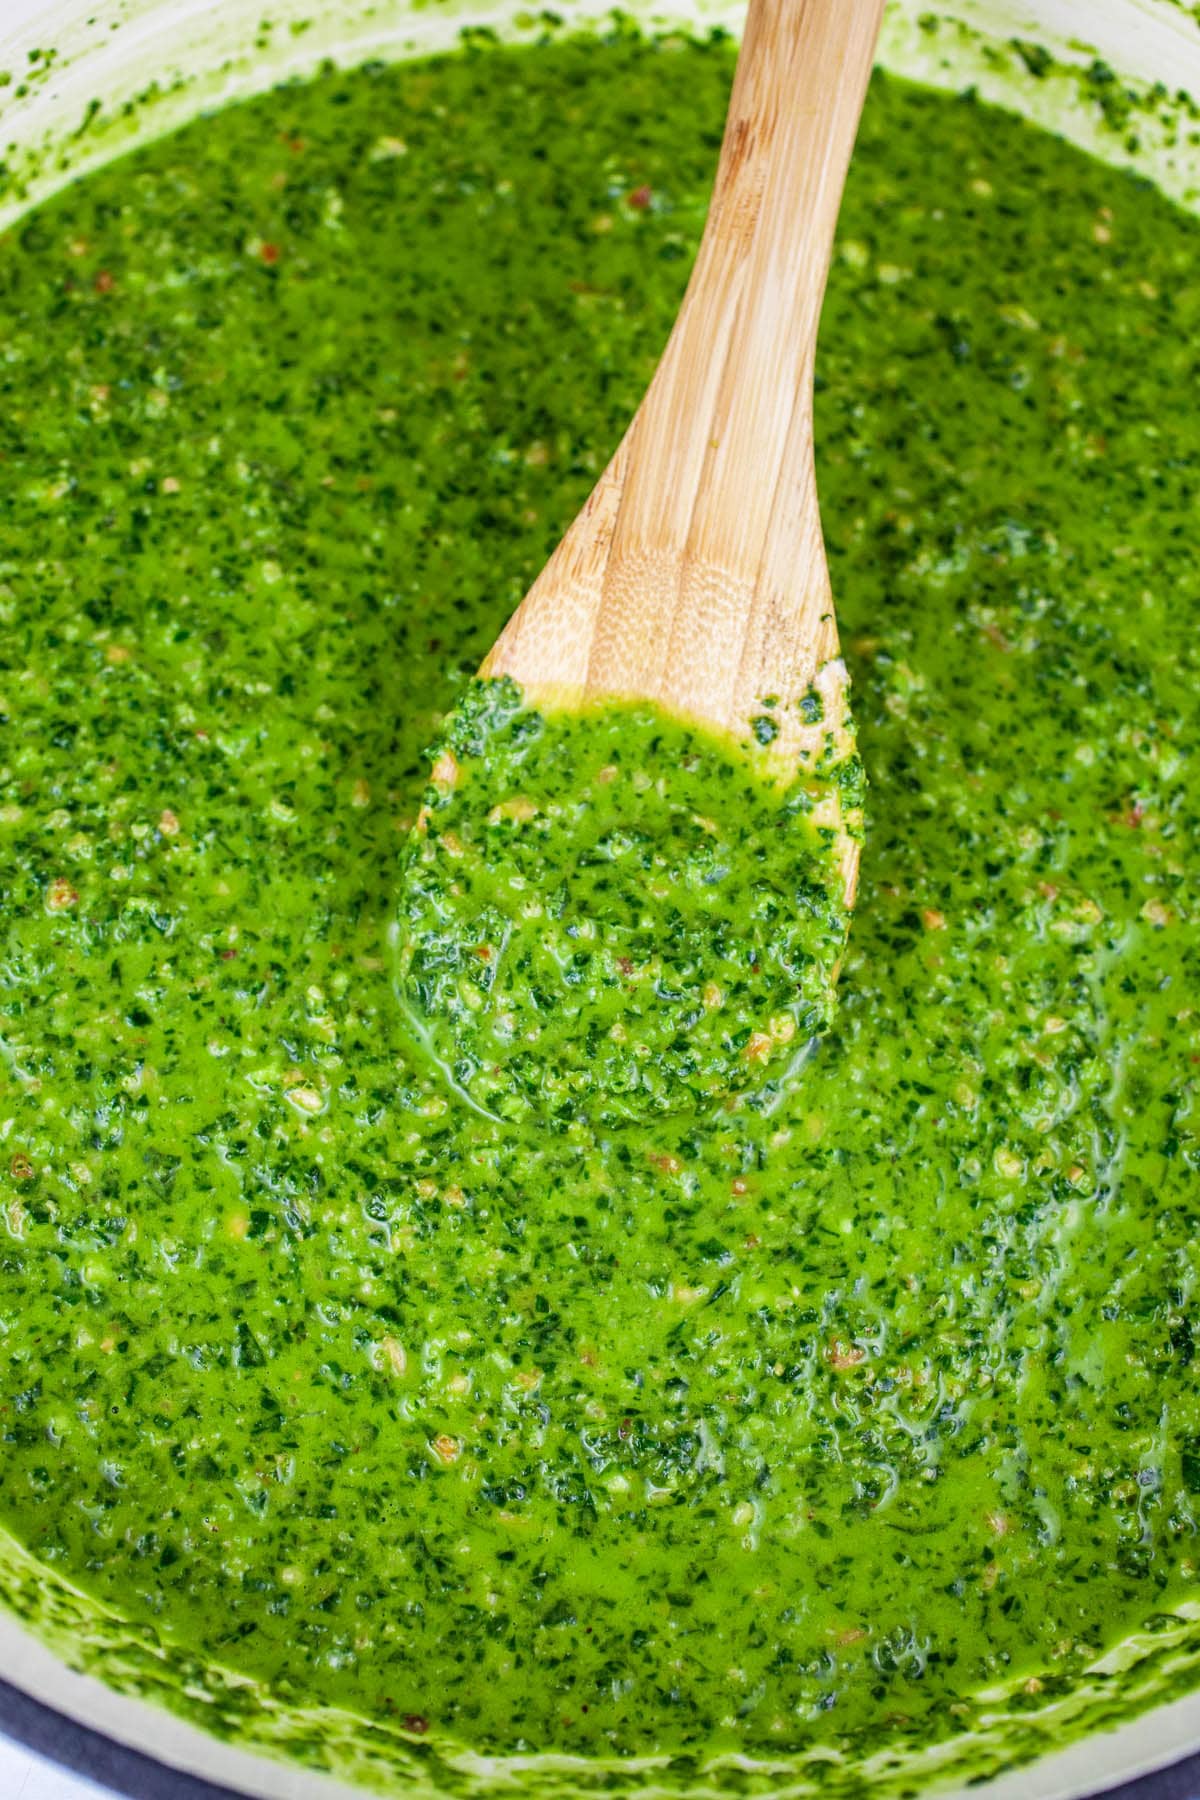 Pesto sauce in skillet with wooden spoon.